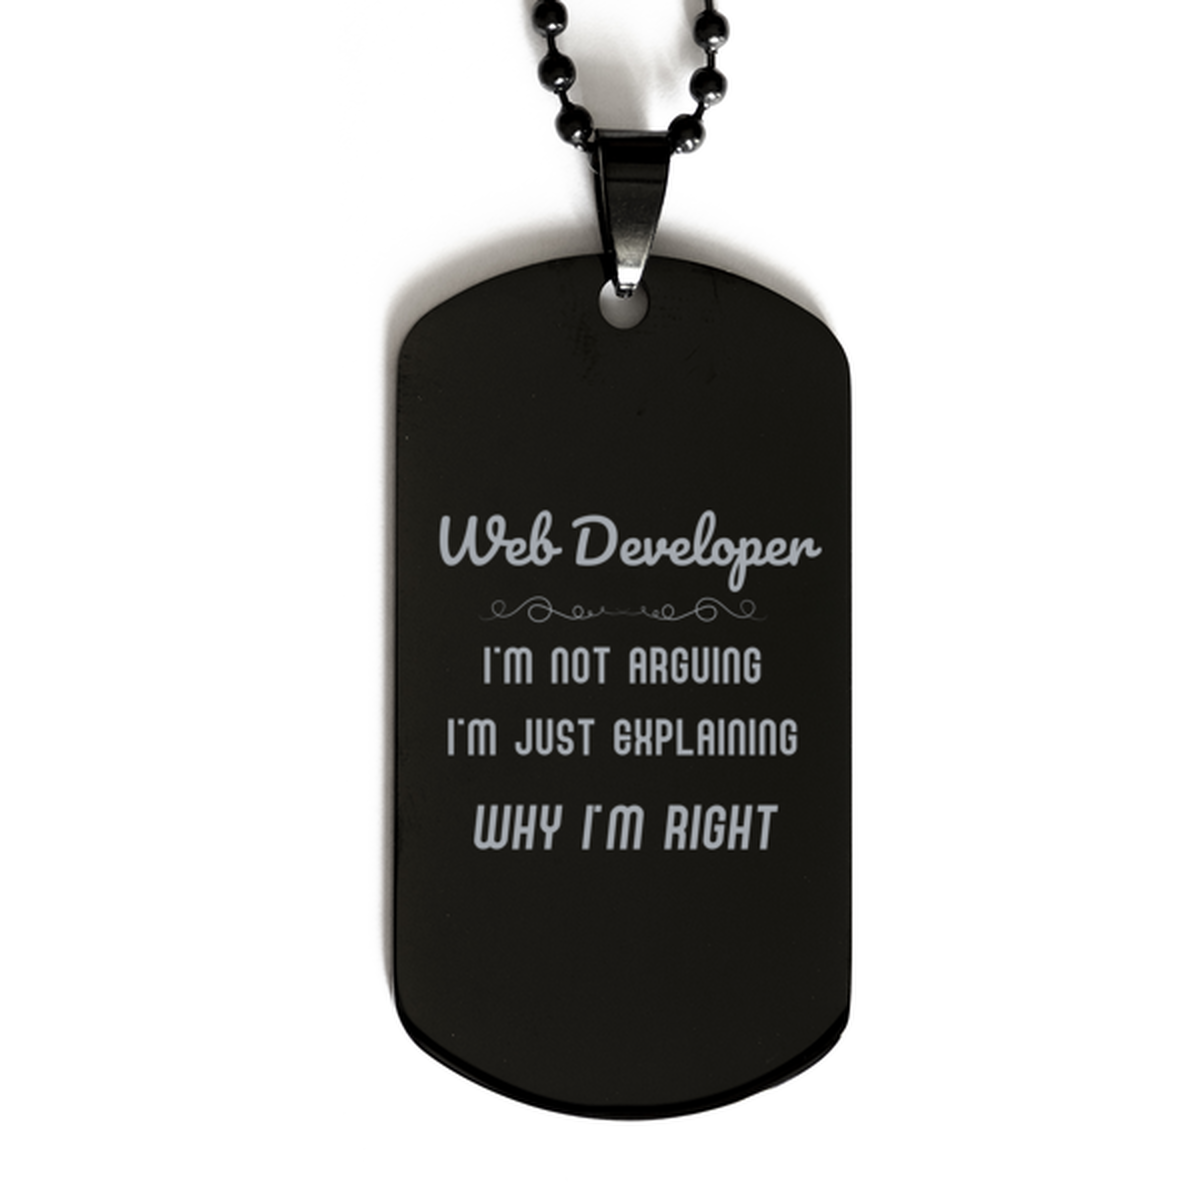 Web Developer I'm not Arguing. I'm Just Explaining Why I'm RIGHT Black Dog Tag, Funny Saying Quote Web Developer Gifts For Web Developer Graduation Birthday Christmas Gifts for Men Women Coworker